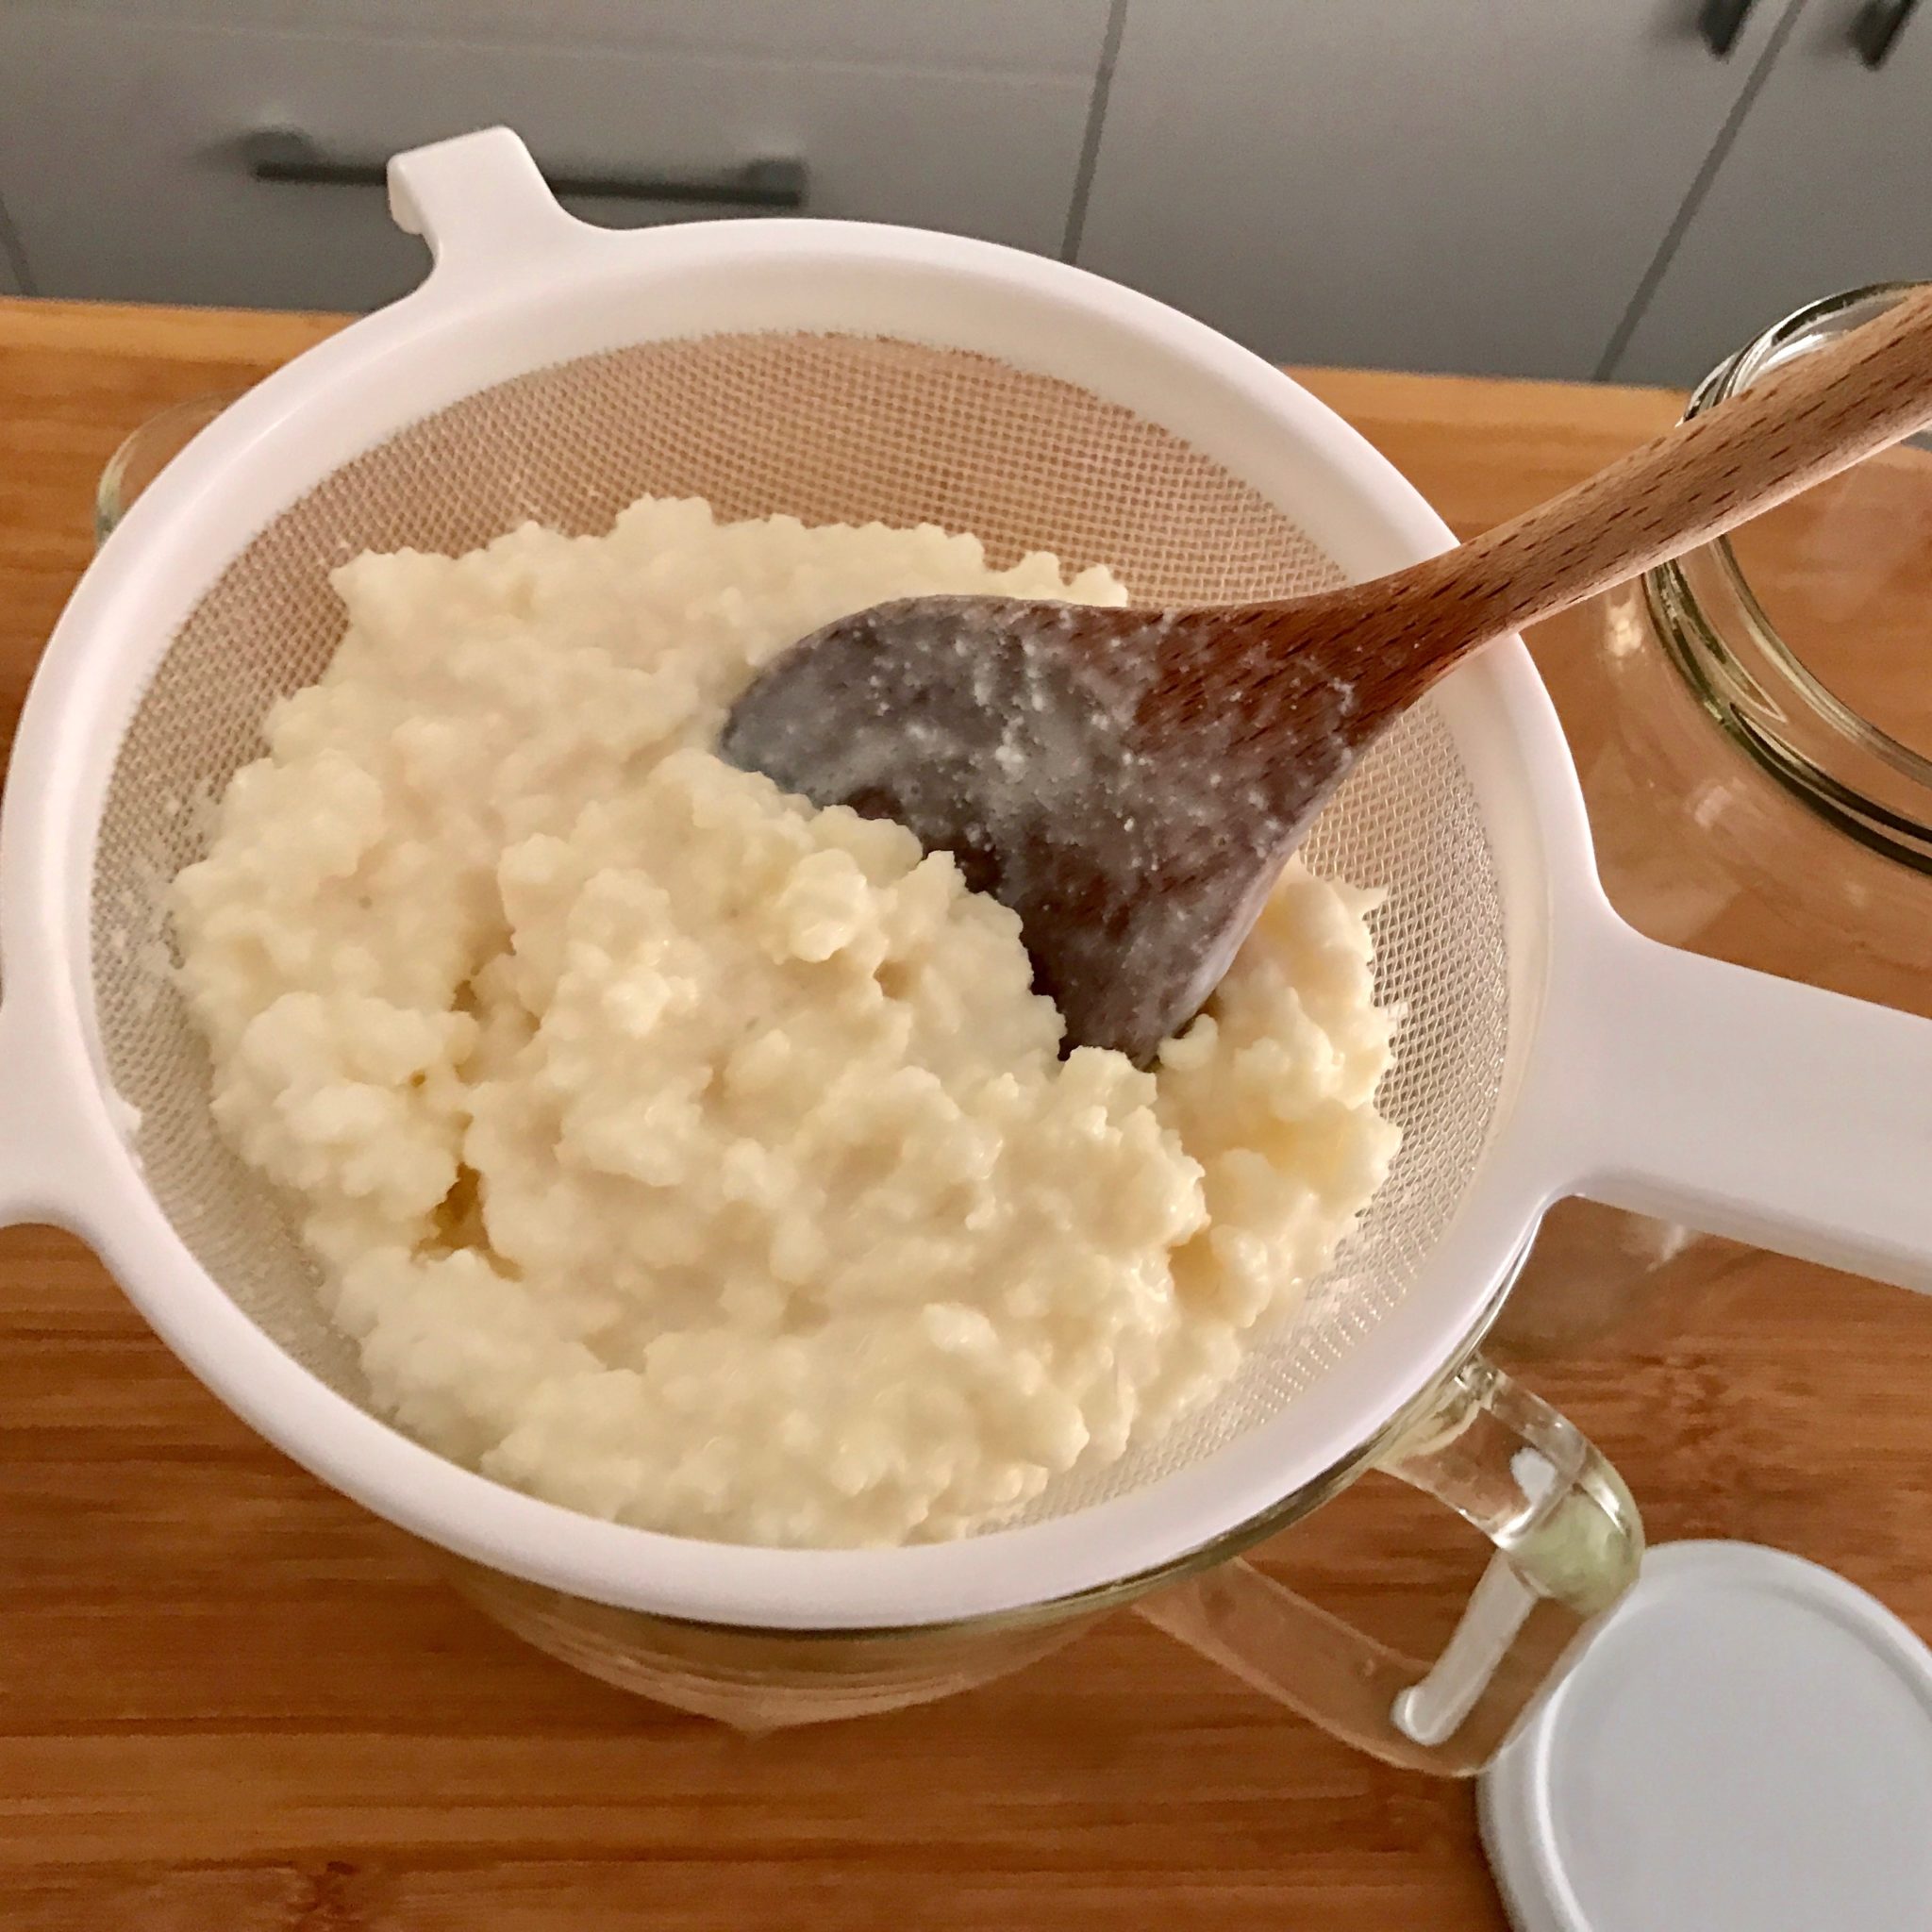 strain the grains in a plastic strainer with a wooden spoon